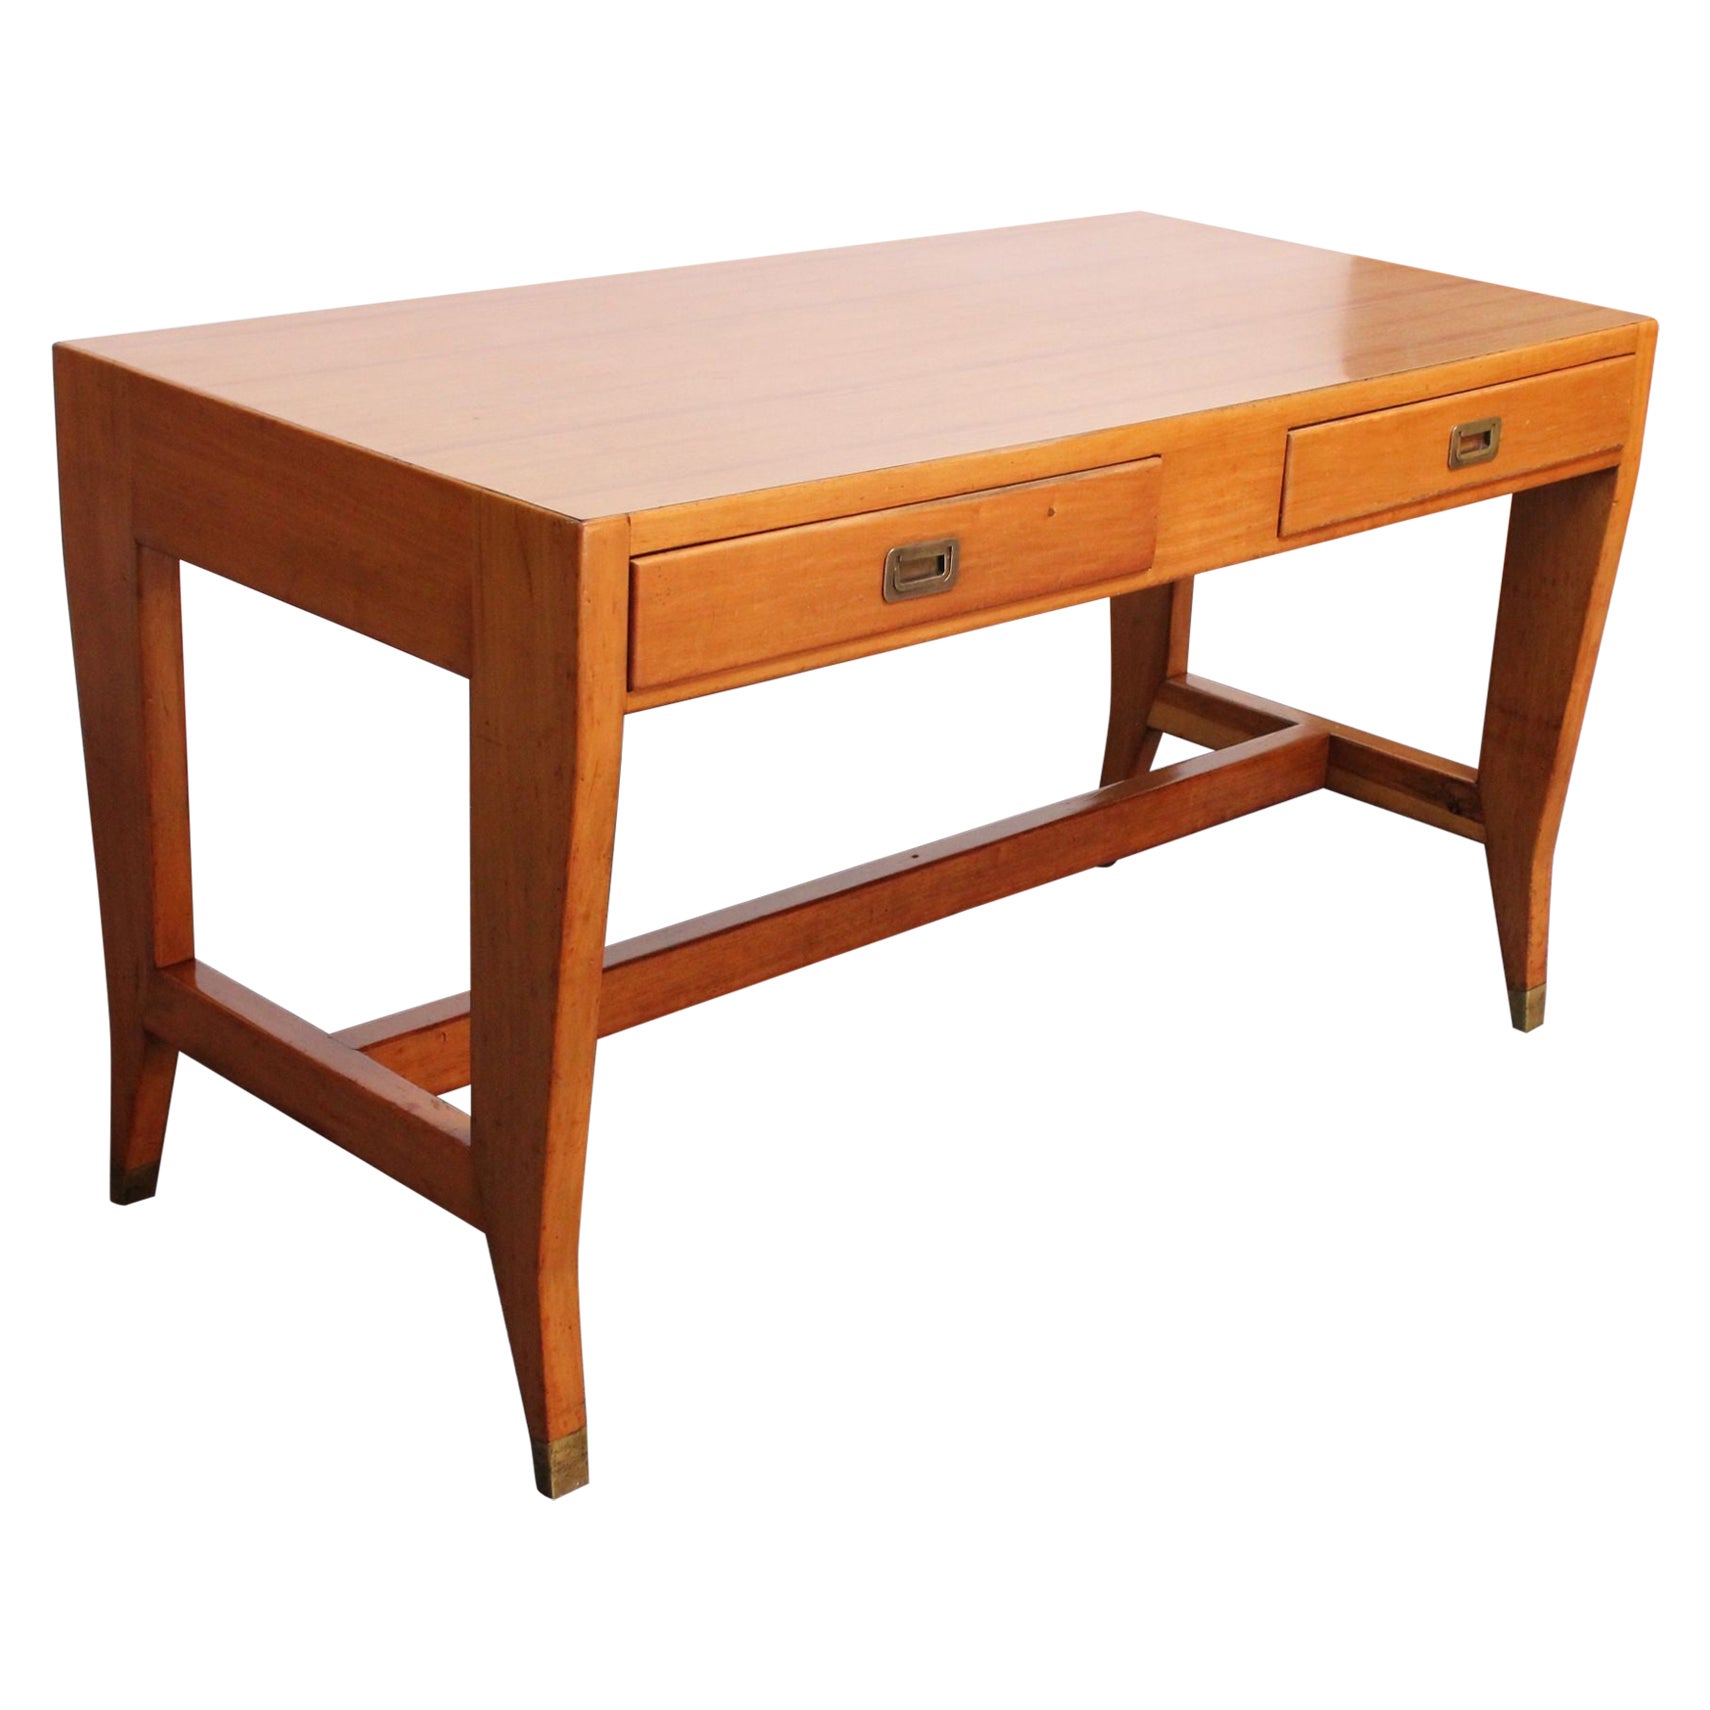 Gio Ponti for BNL Walnut and Brass Writing Table / Desk For Sale at 1stDibs